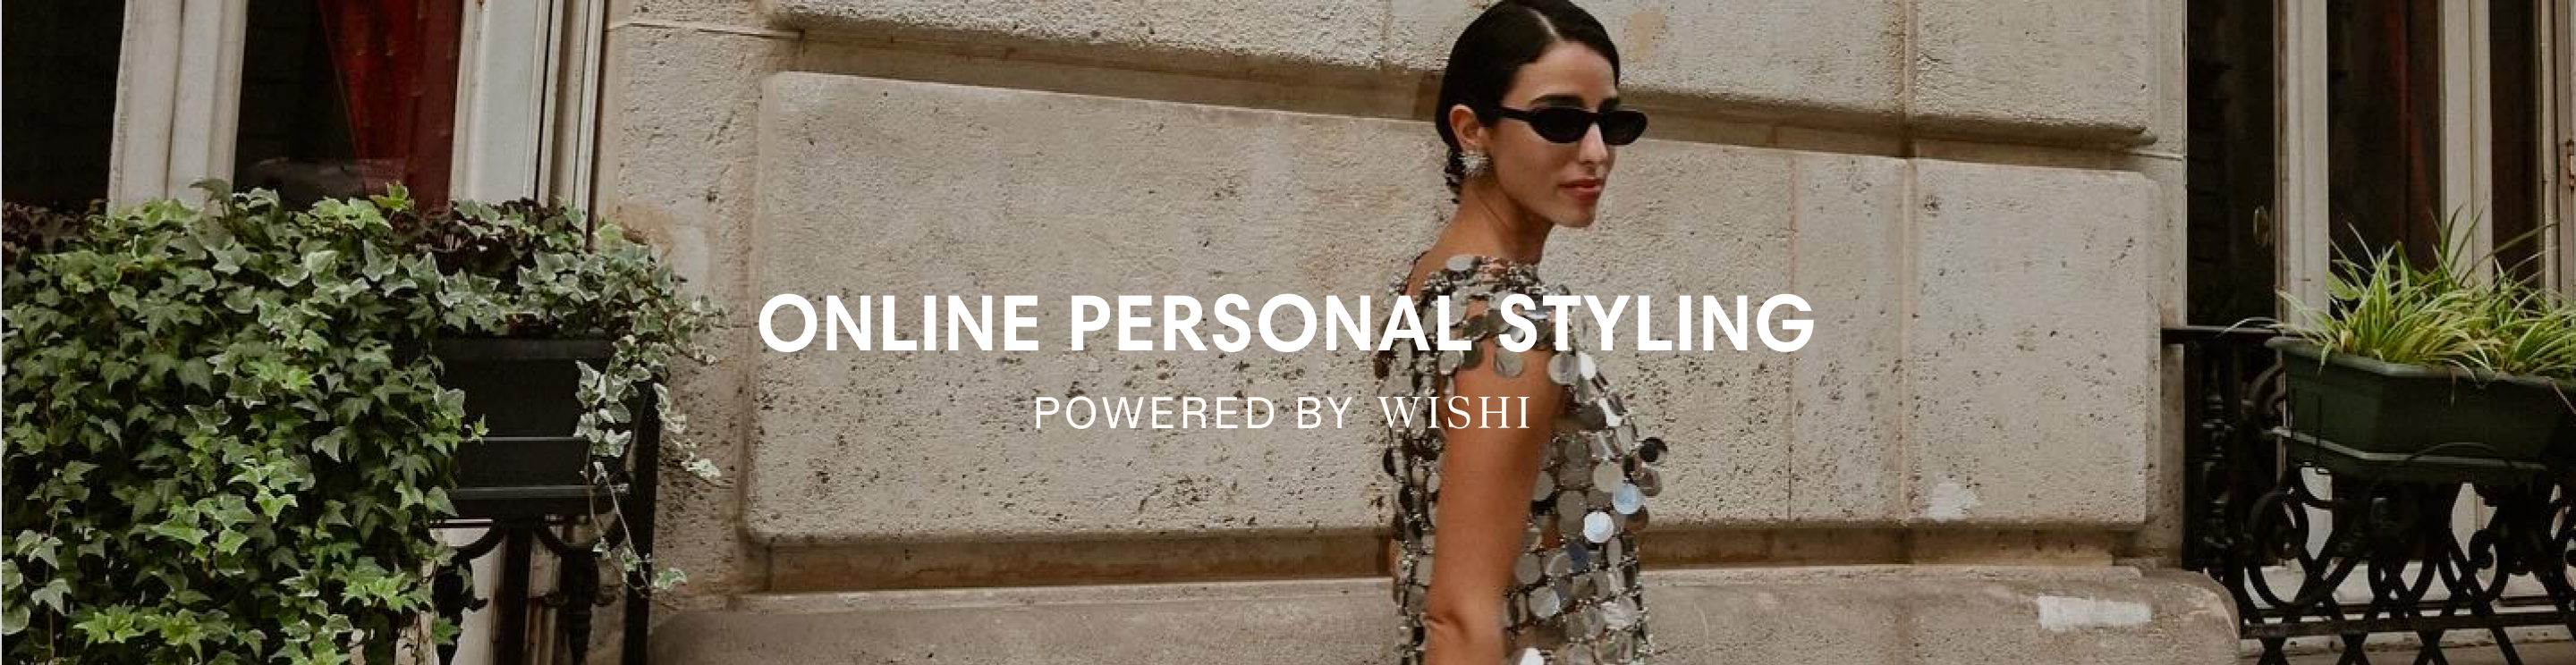 Online personal styling